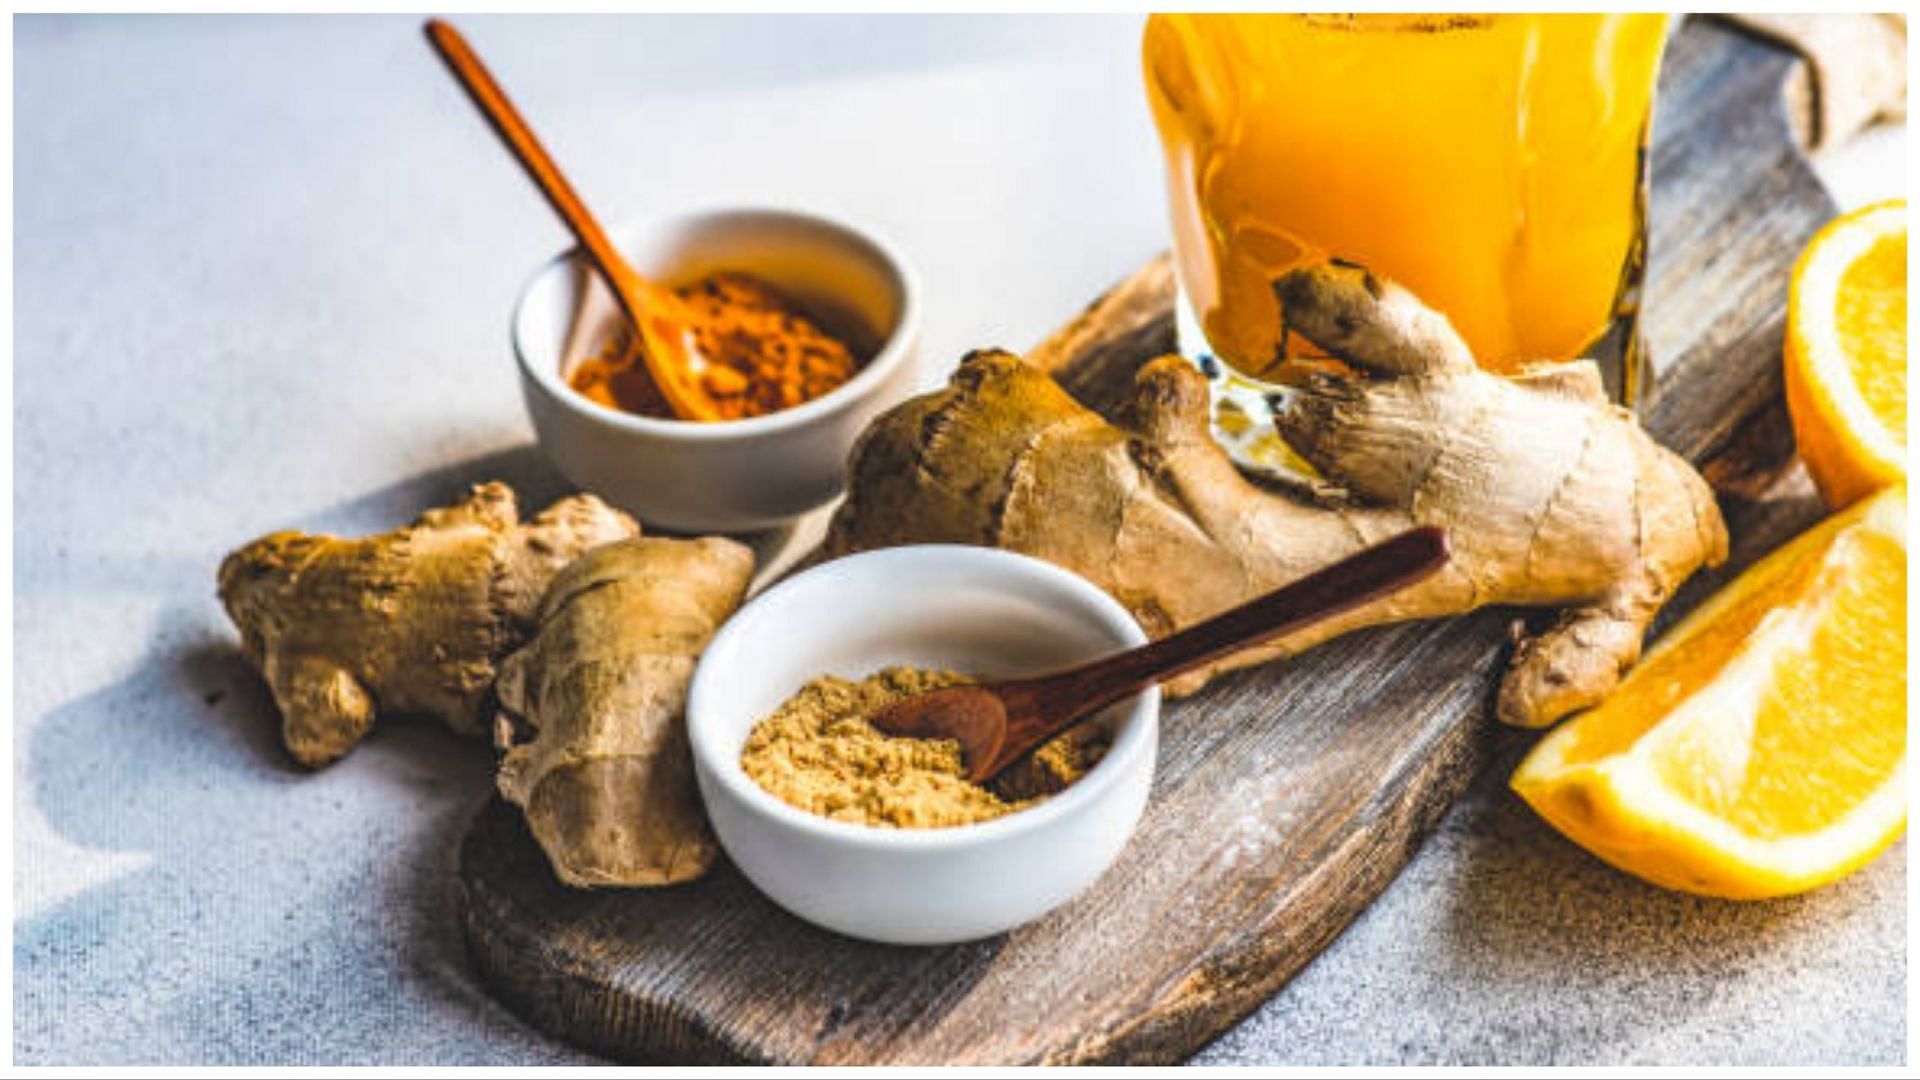 Ginger for acid reflux - Maintains gut health (Image sourced via Getty Images)